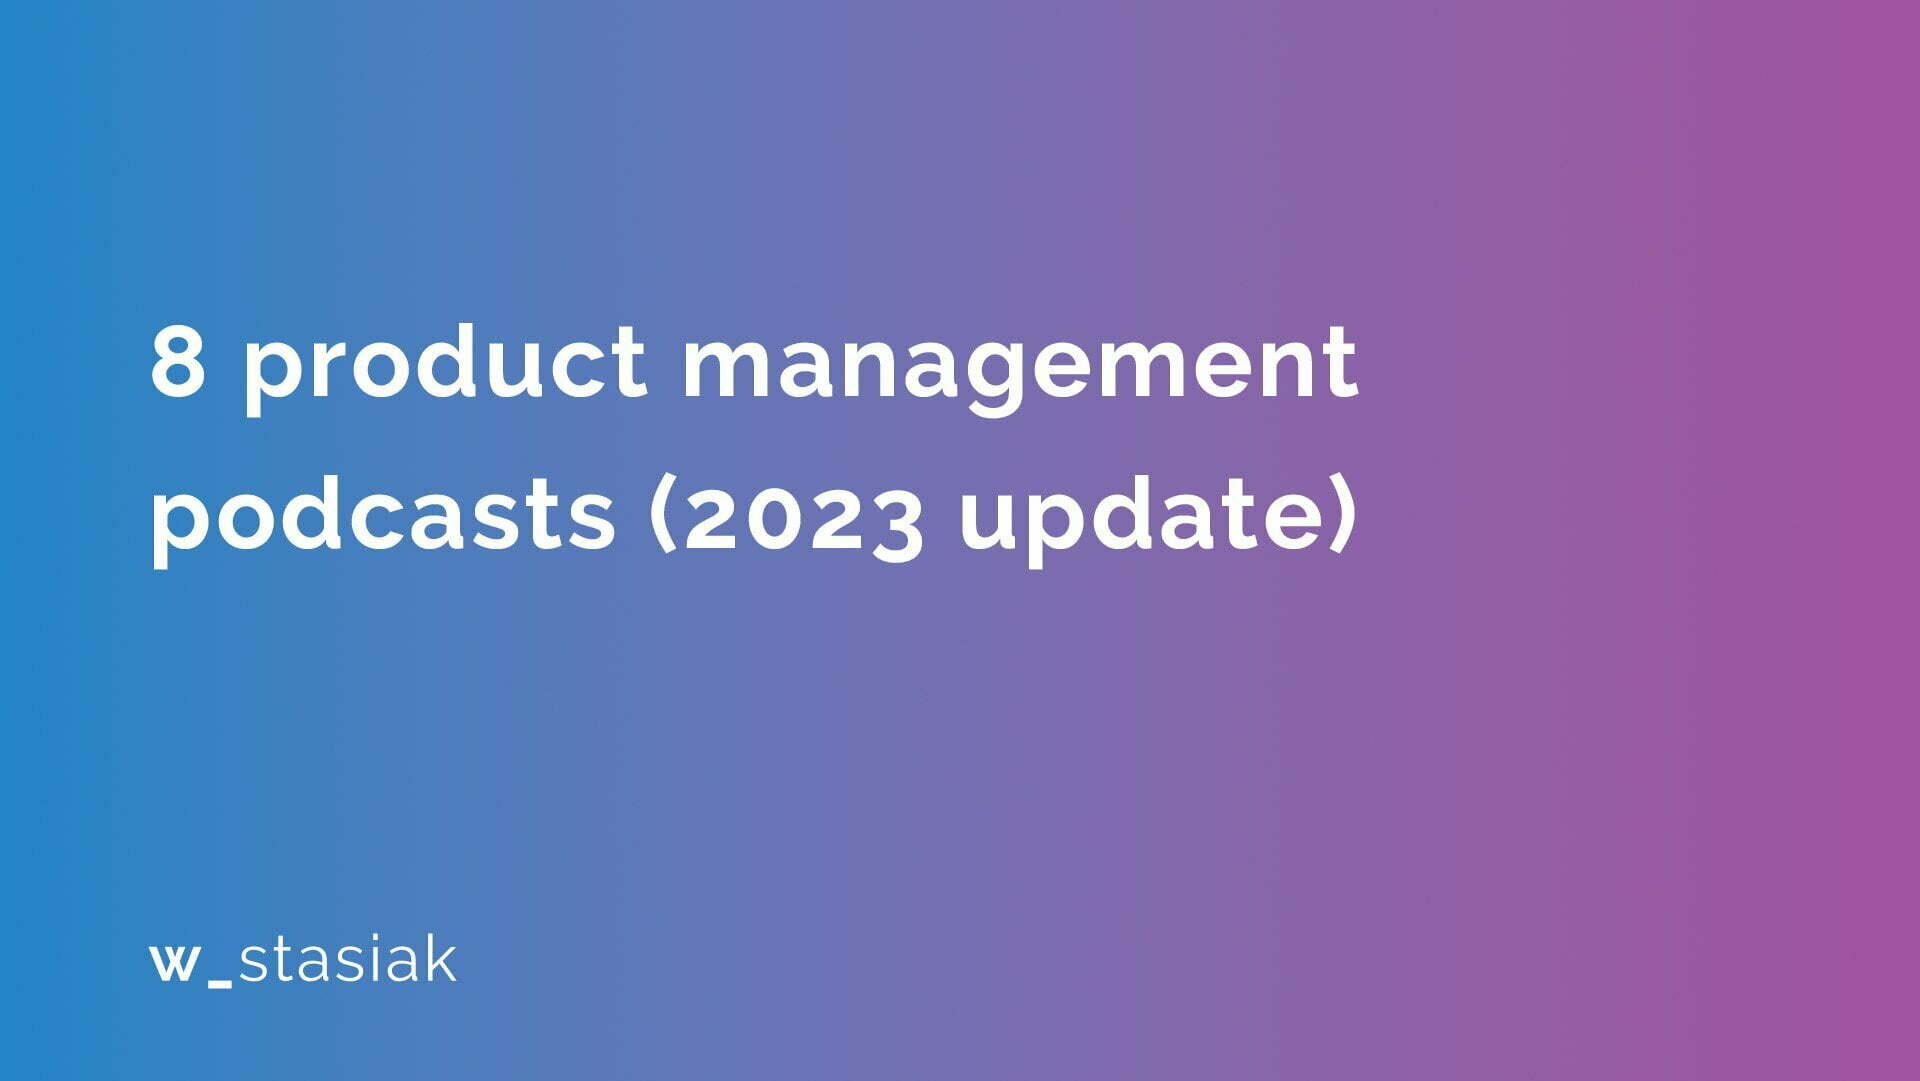 8 product management podcasts (2023 update) - ws